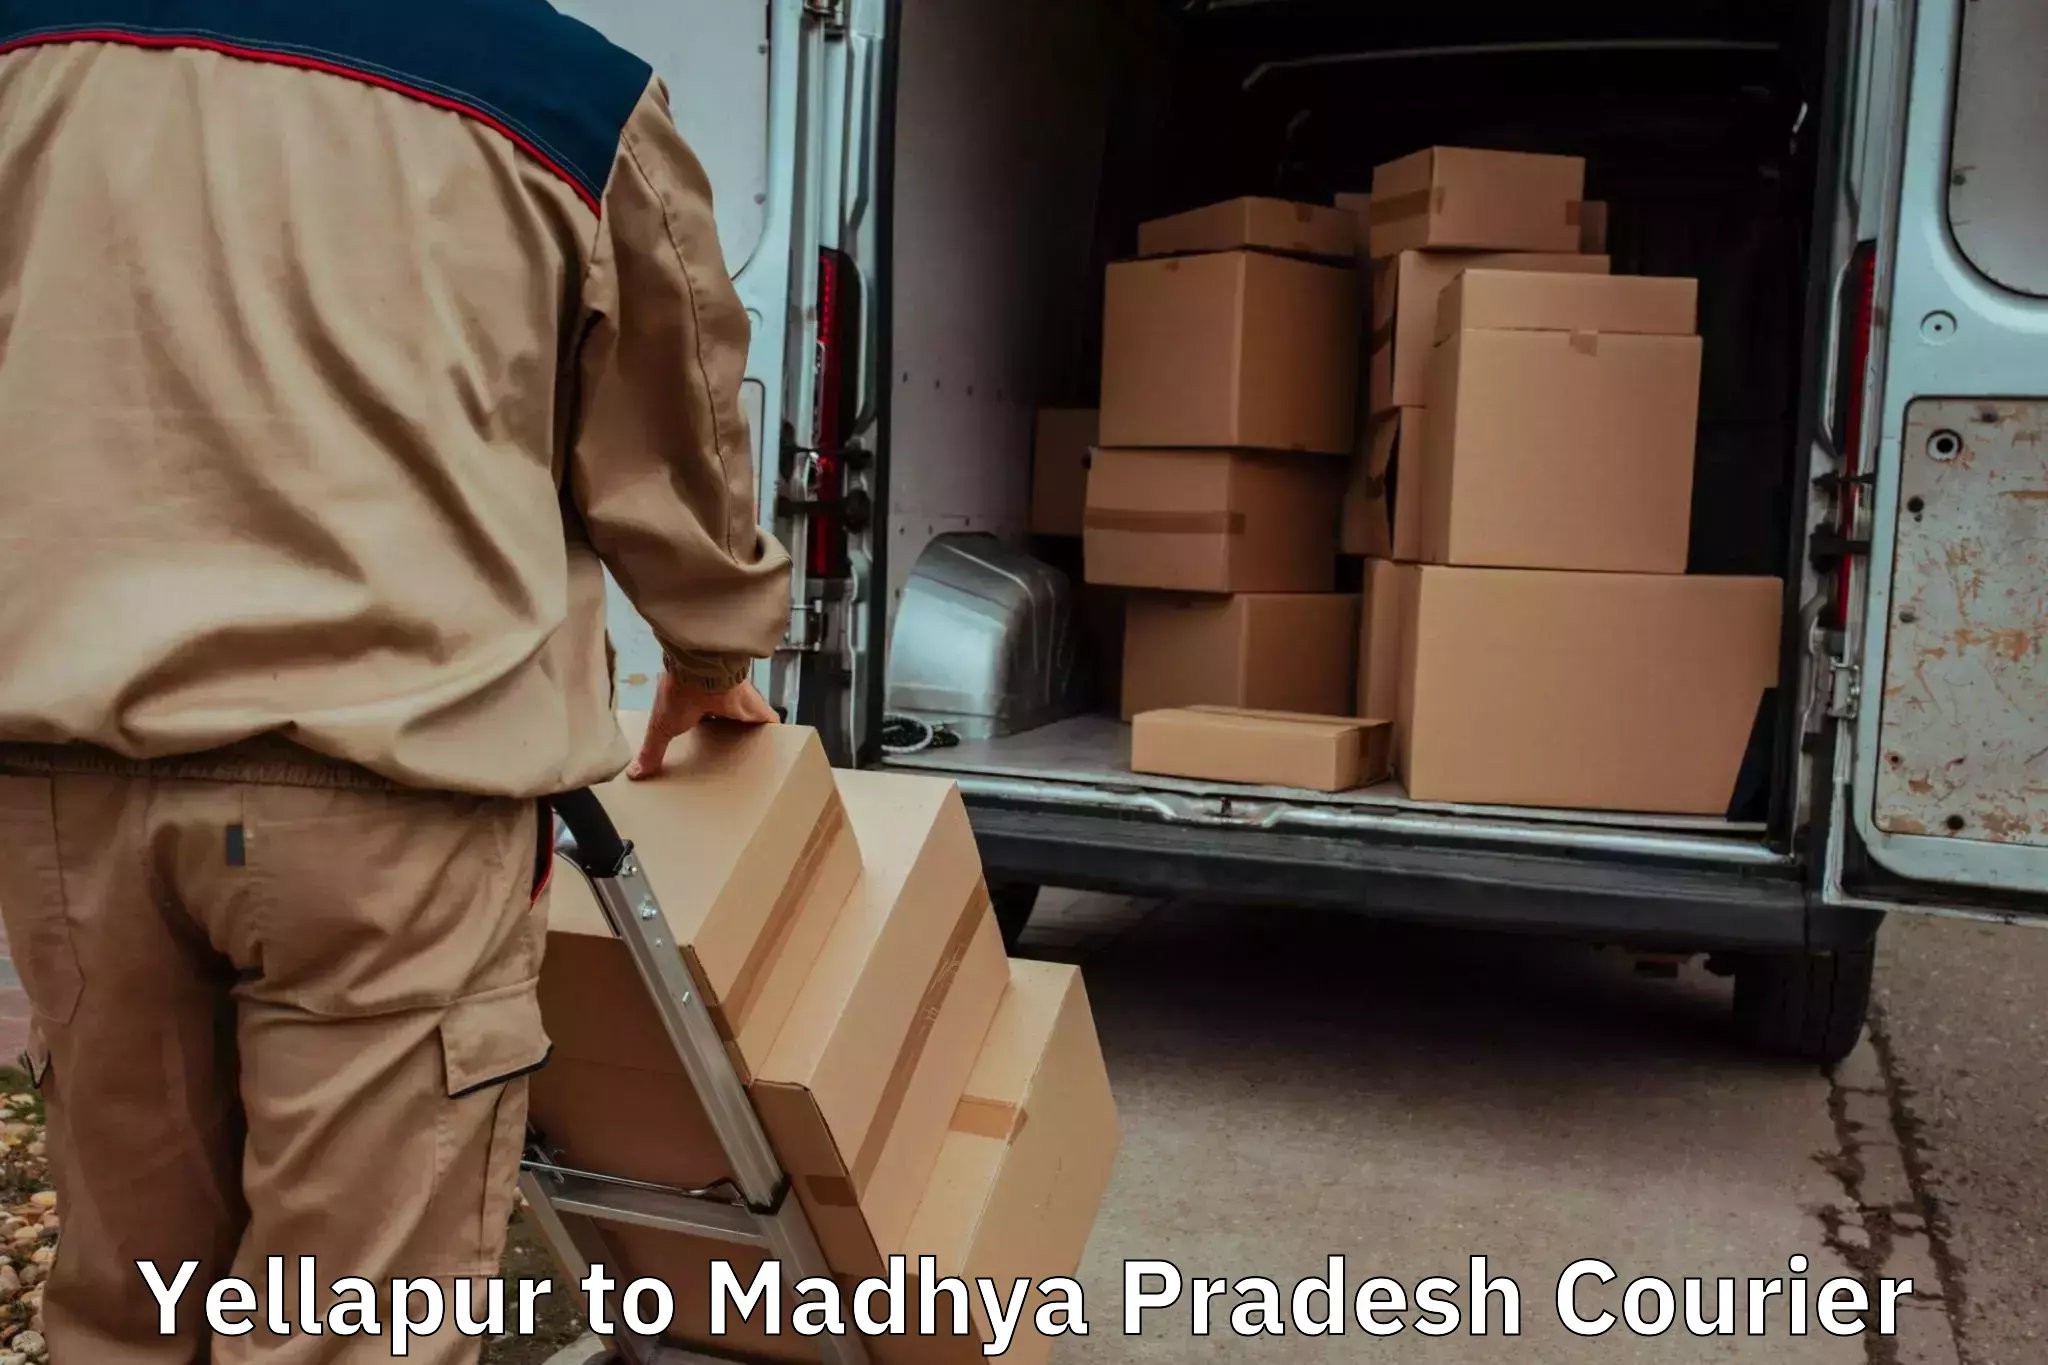 Efficient relocation services Yellapur to Bhopal